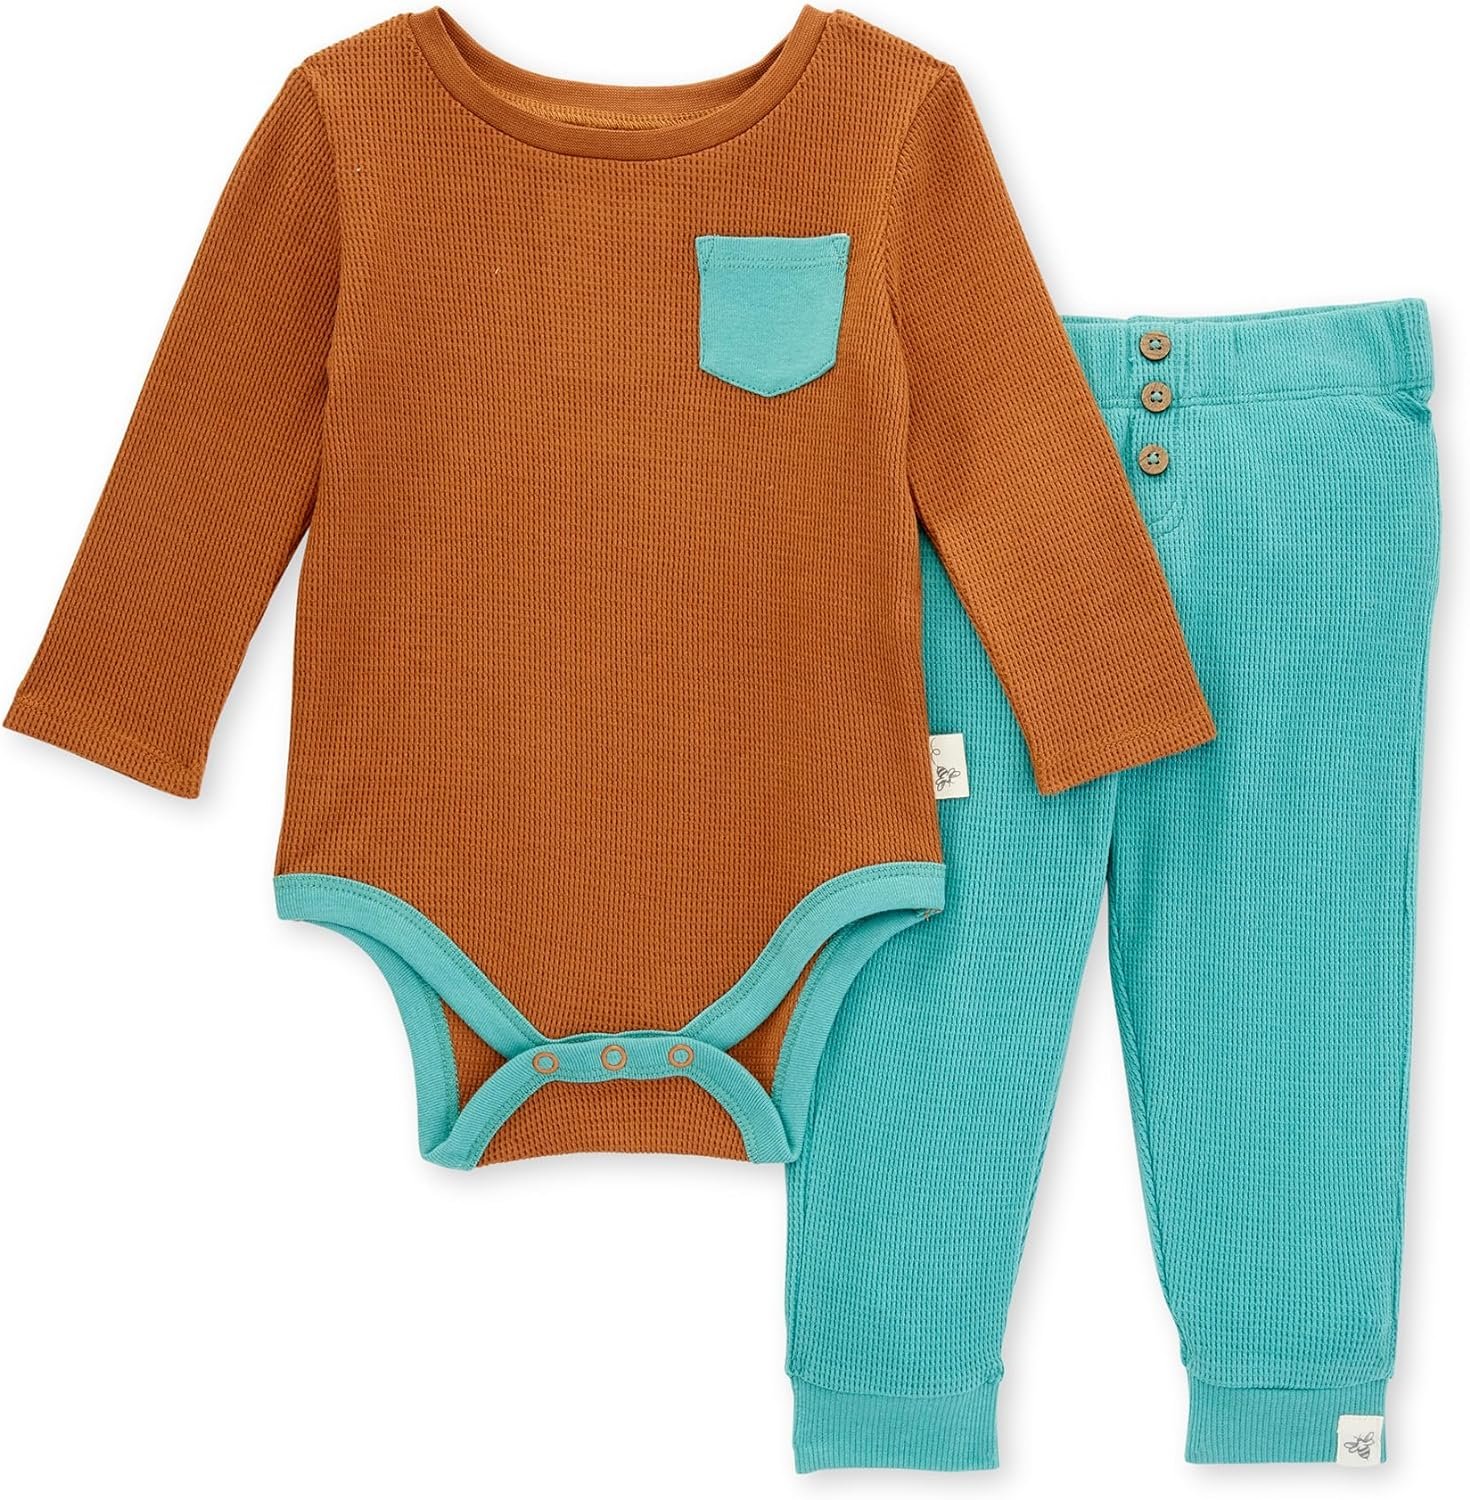 Burt’s Bees Baby Bodysuit and Pant Set Review